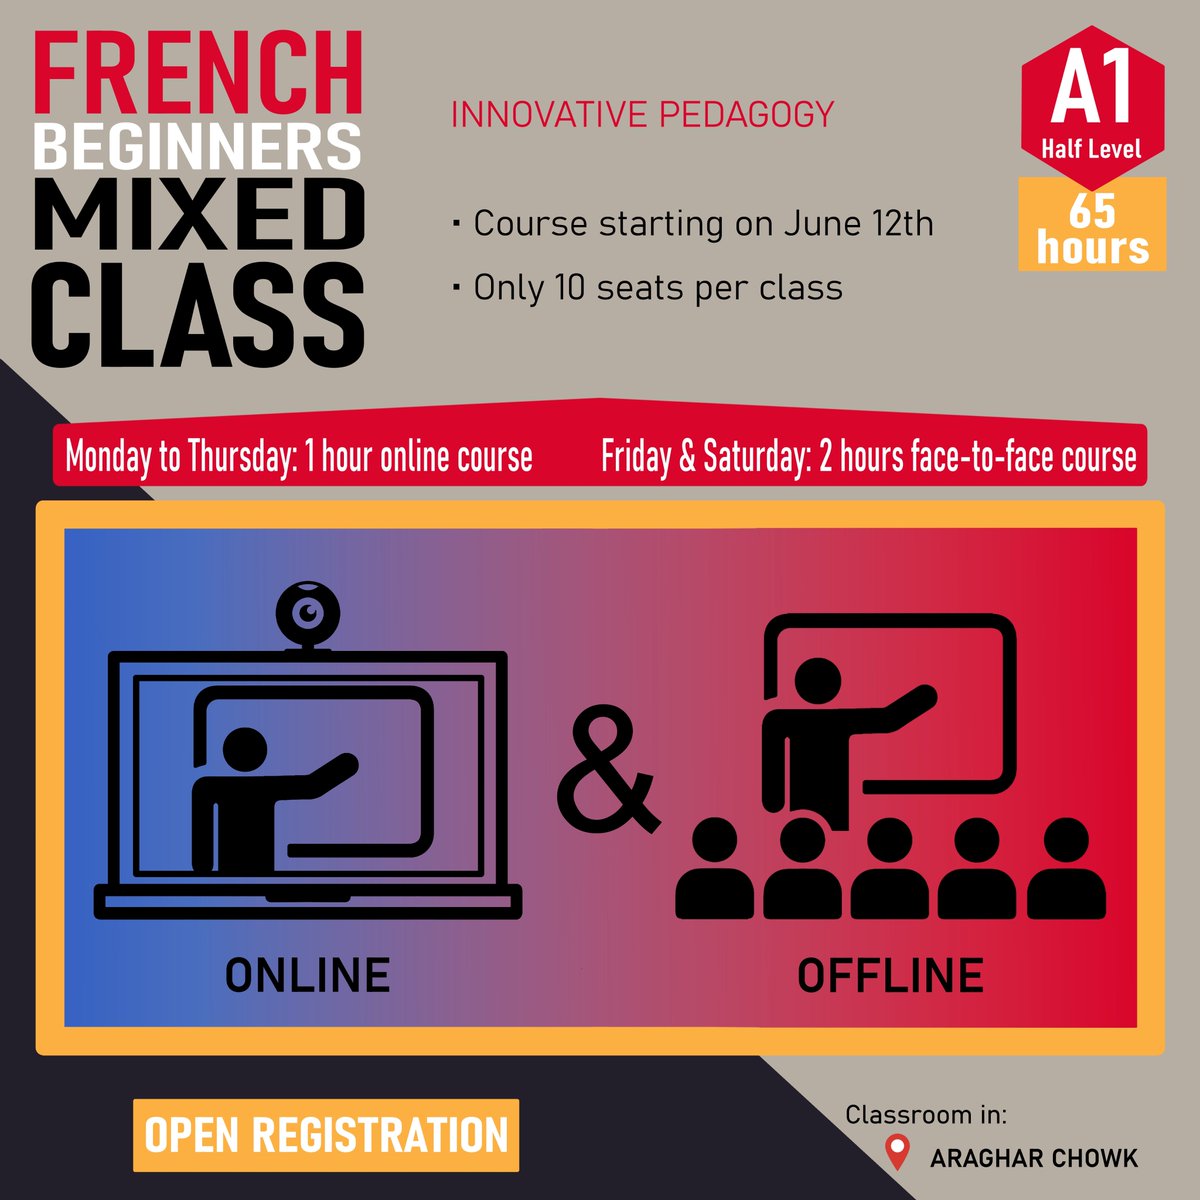 Hurry up! Our new mixed online and offline French course for beginners will be starting soon!

Online courses: 7pm to 8pm
Offline courses: 4pm to 6pm

Rs 9,750 for 65 hours
*Seats are limited

WhatsApp: +91 70 600 212 97
dehradun.chandigarh@afindia.org

#learnfrench #dehradun